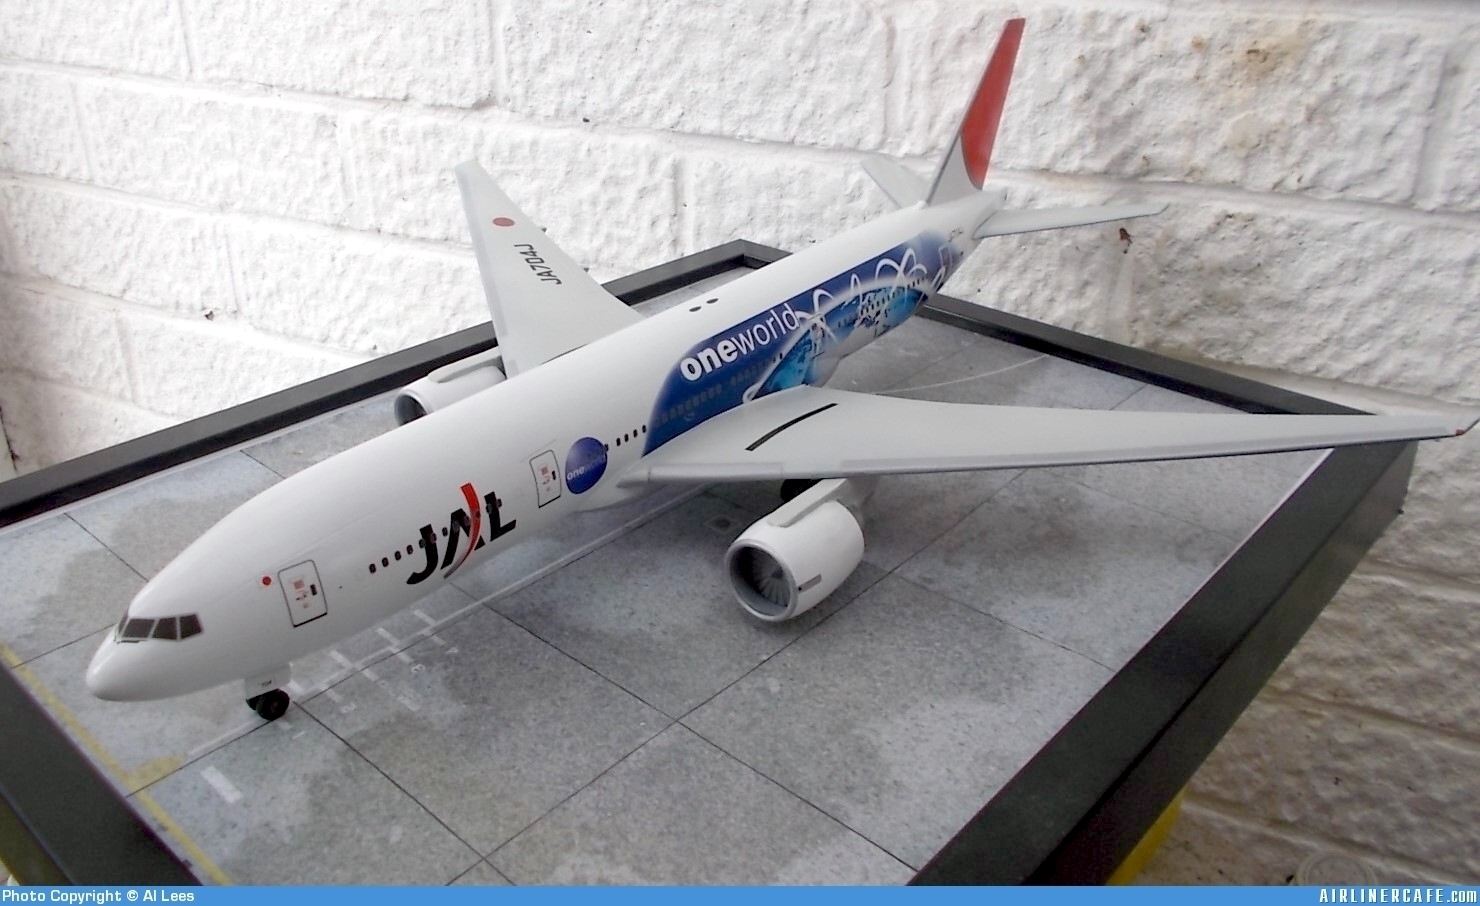 Japan Airlines JAL (Oneworld mural) Boeing 777-200 - Minicraft 1 